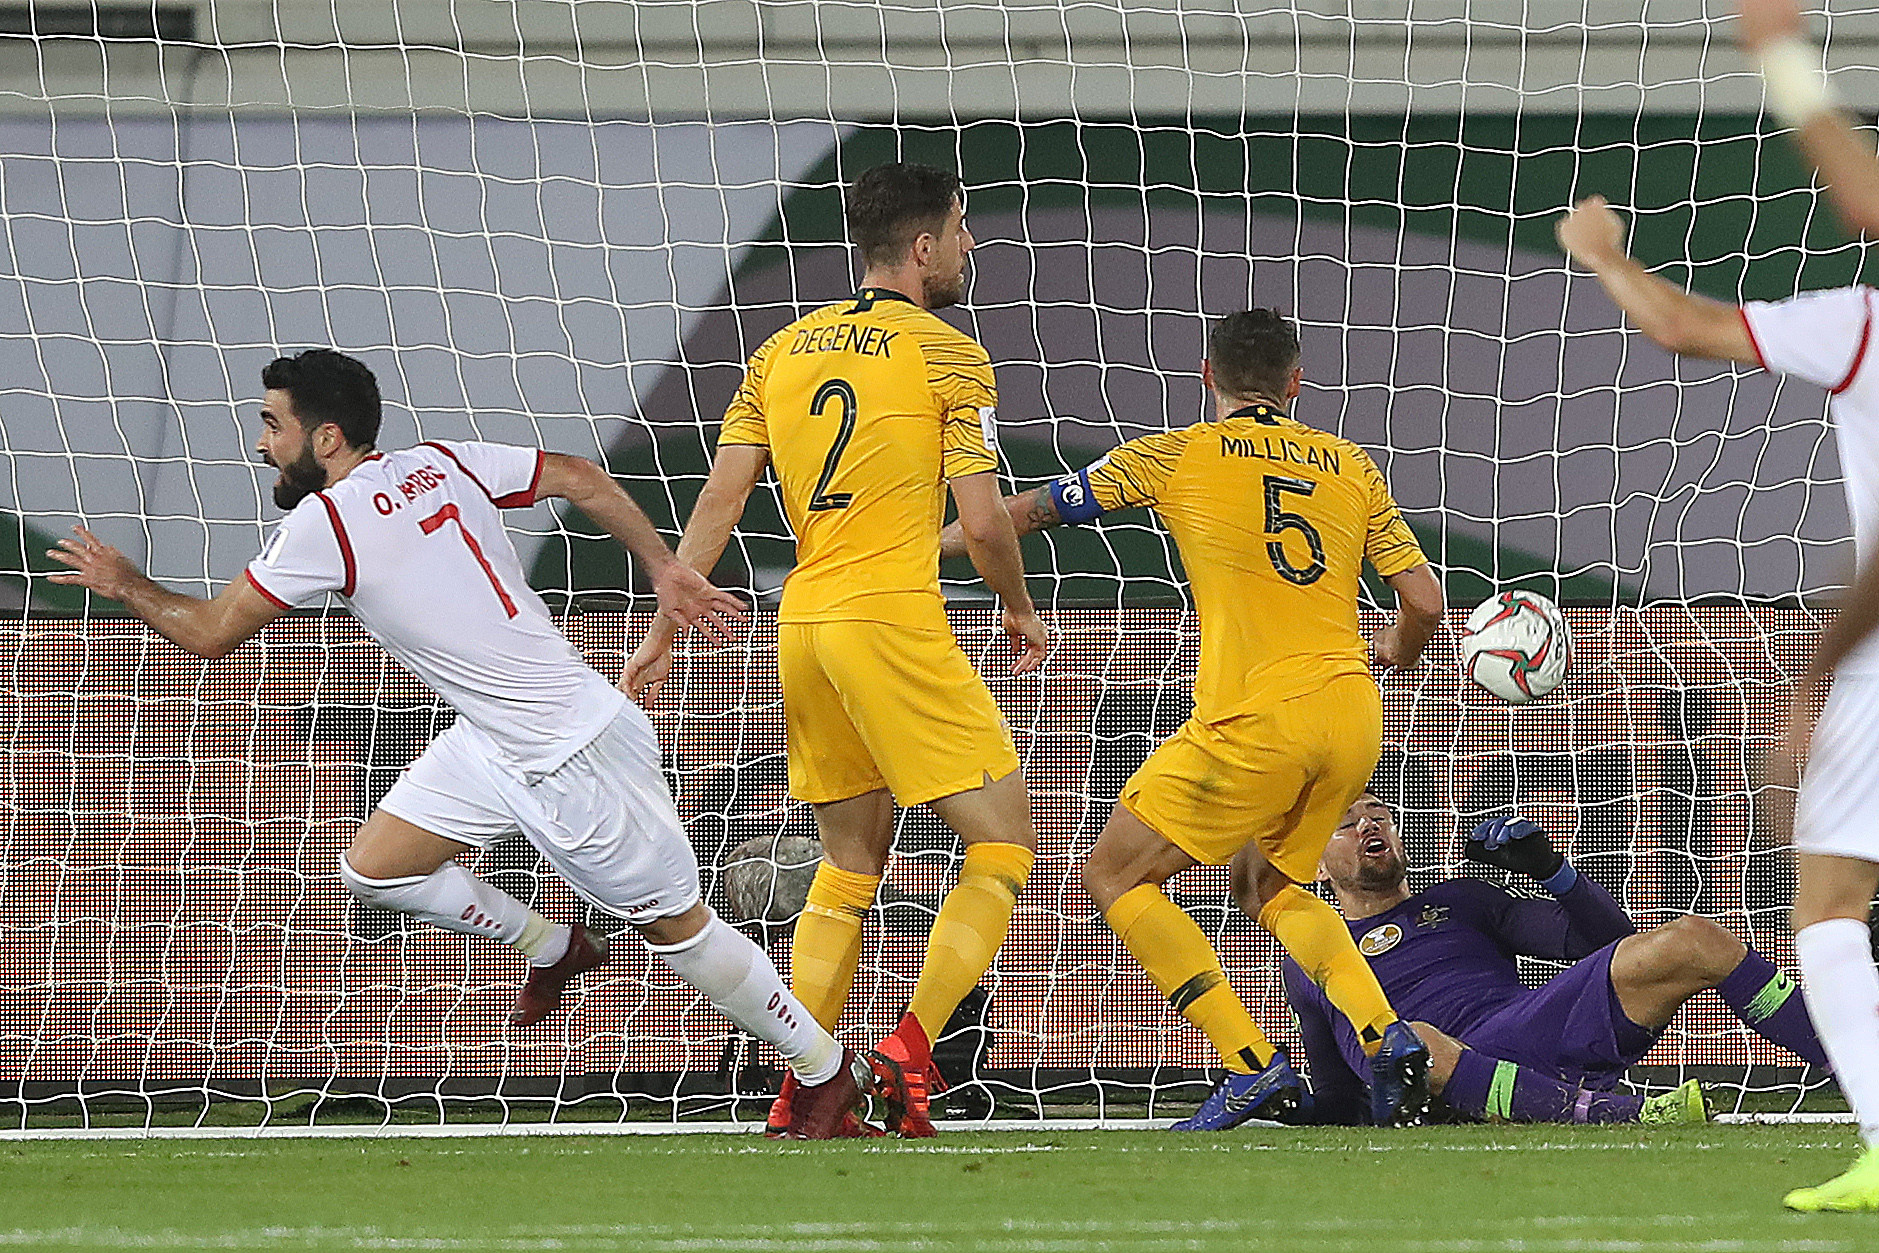 Syria twice equalised before they were subjected to last-minute heartbreak ©Getty Images